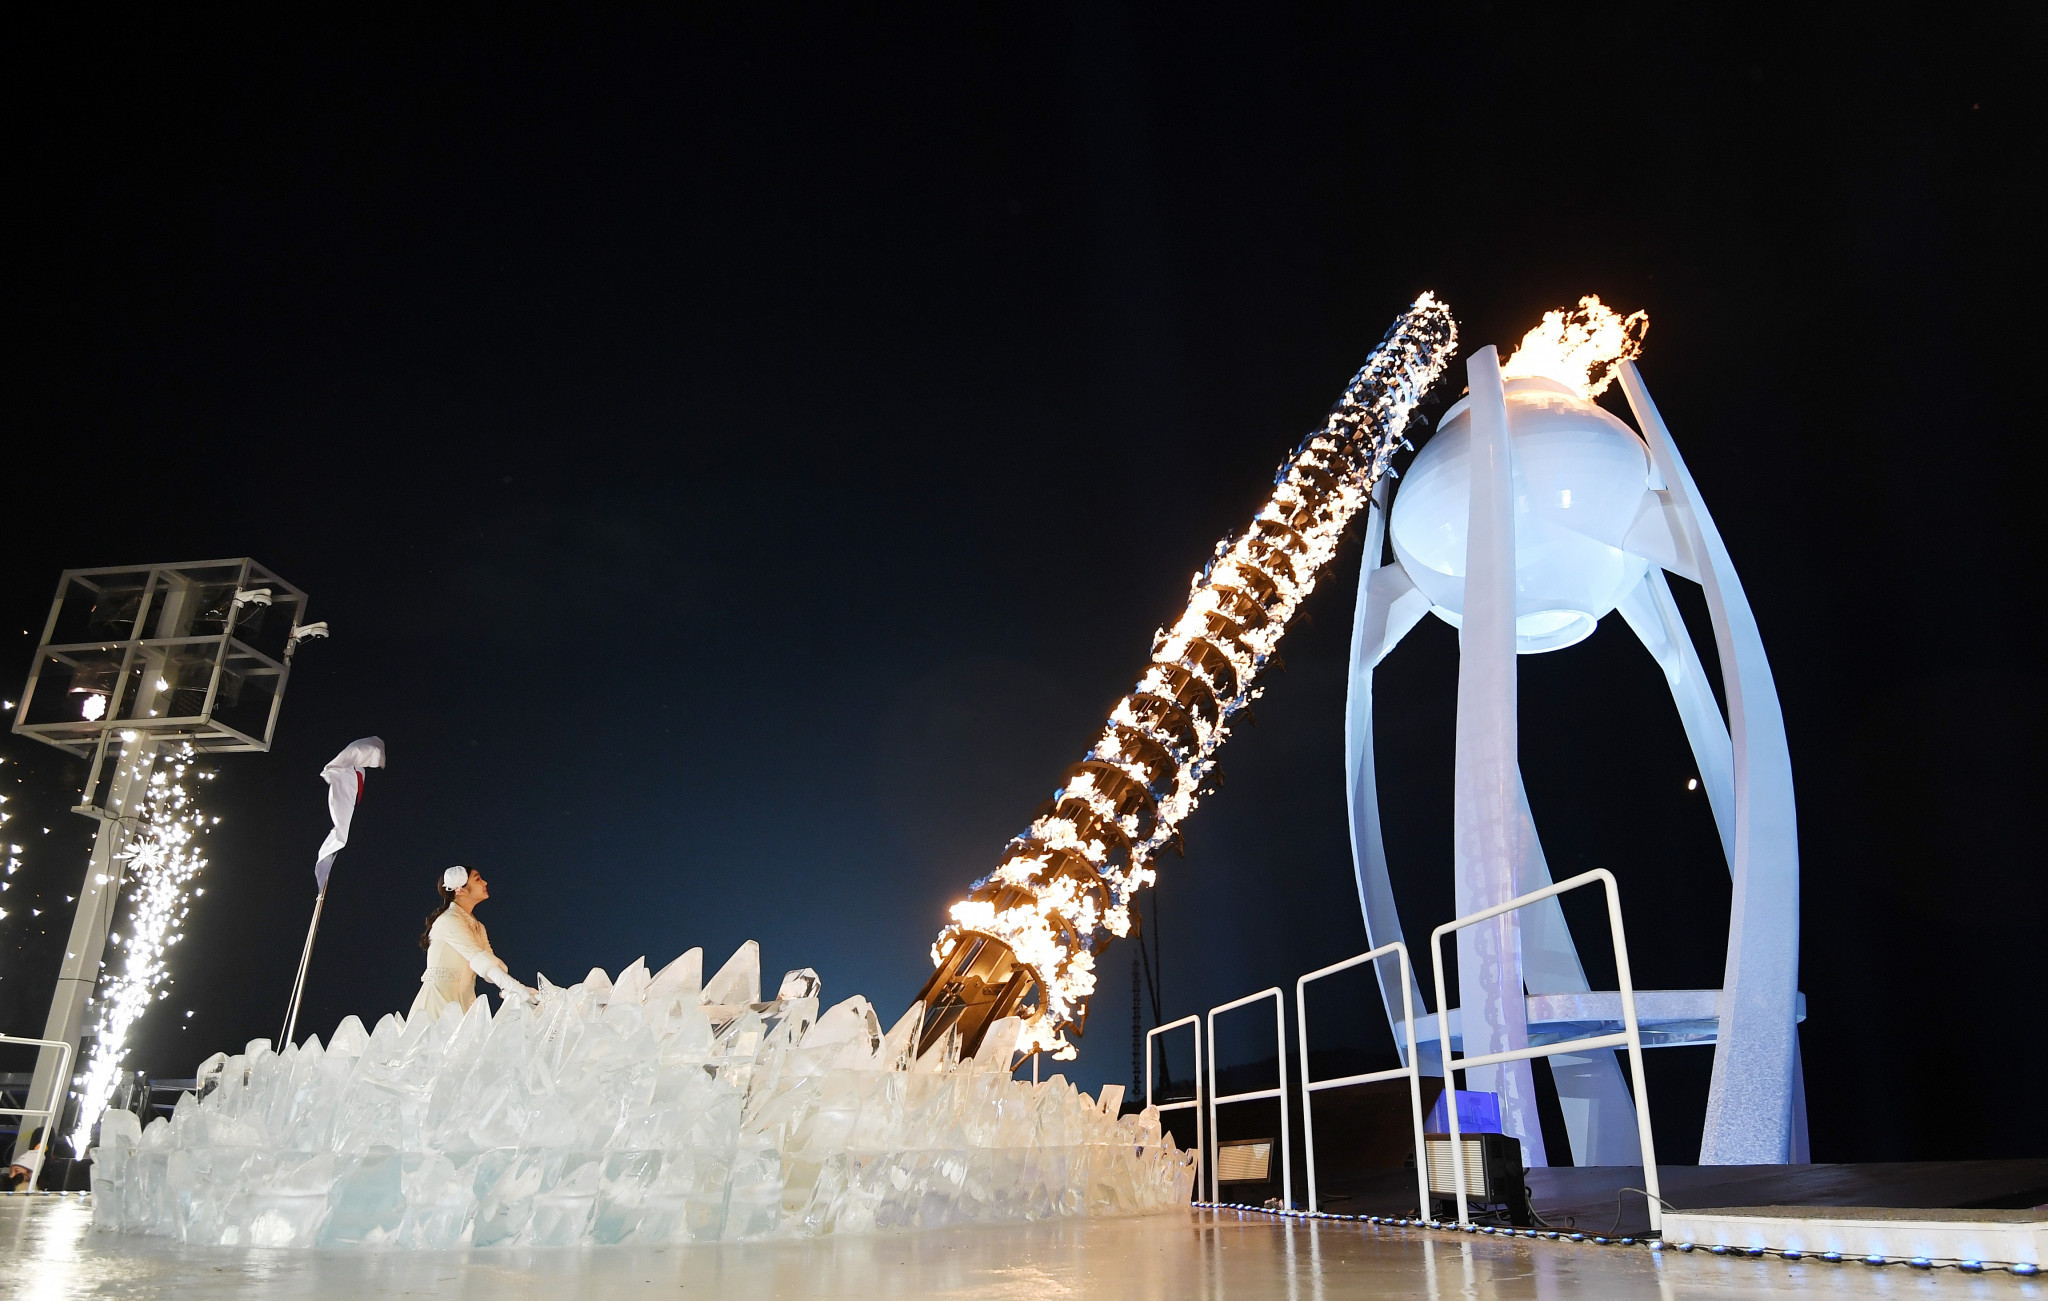 Figure skater Yuna Kim lit the Olympic flame at the Opening Ceremony ©Getty Images